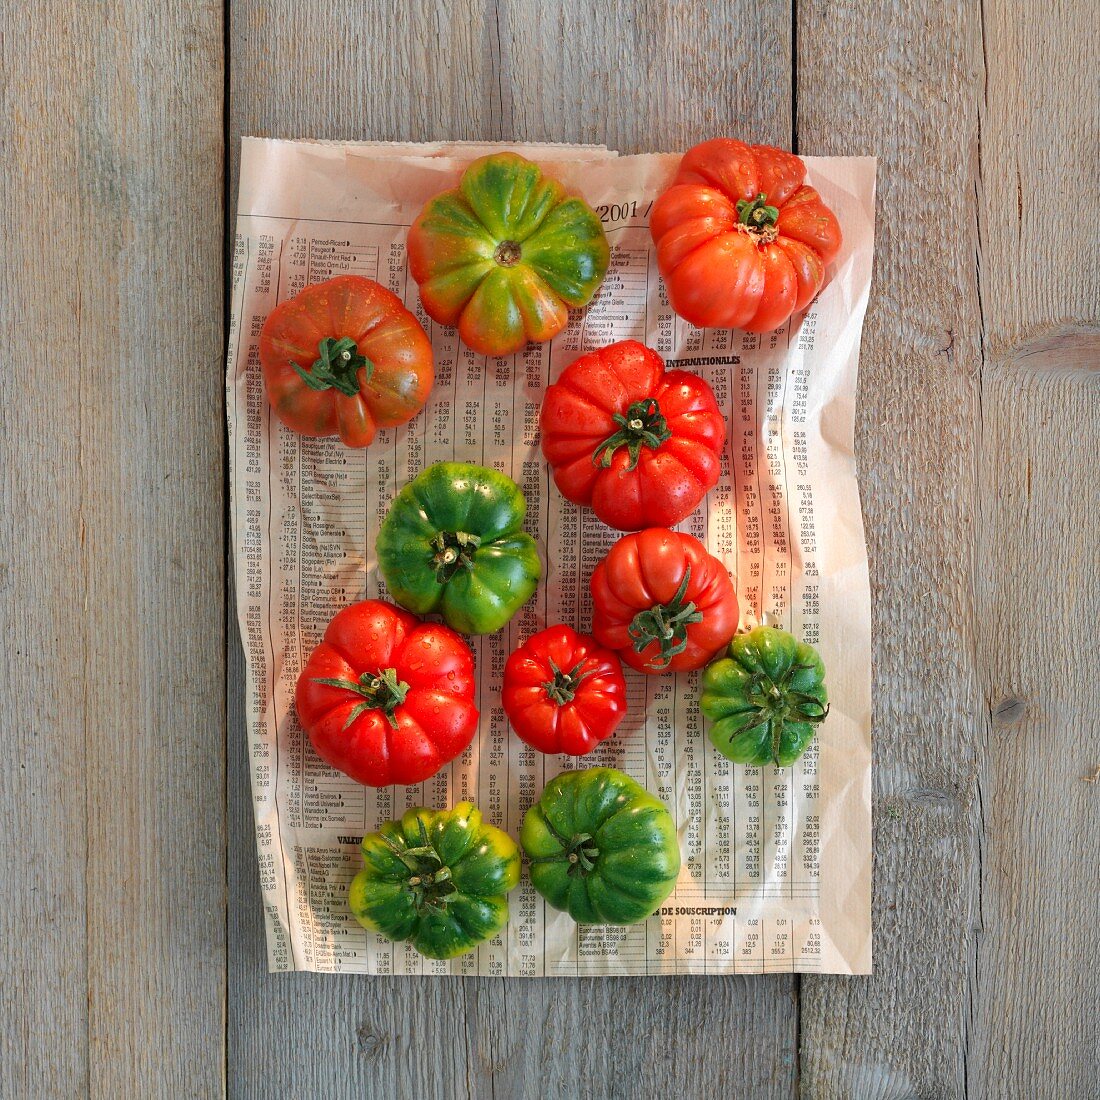 Green and red tomatoes on newspaper